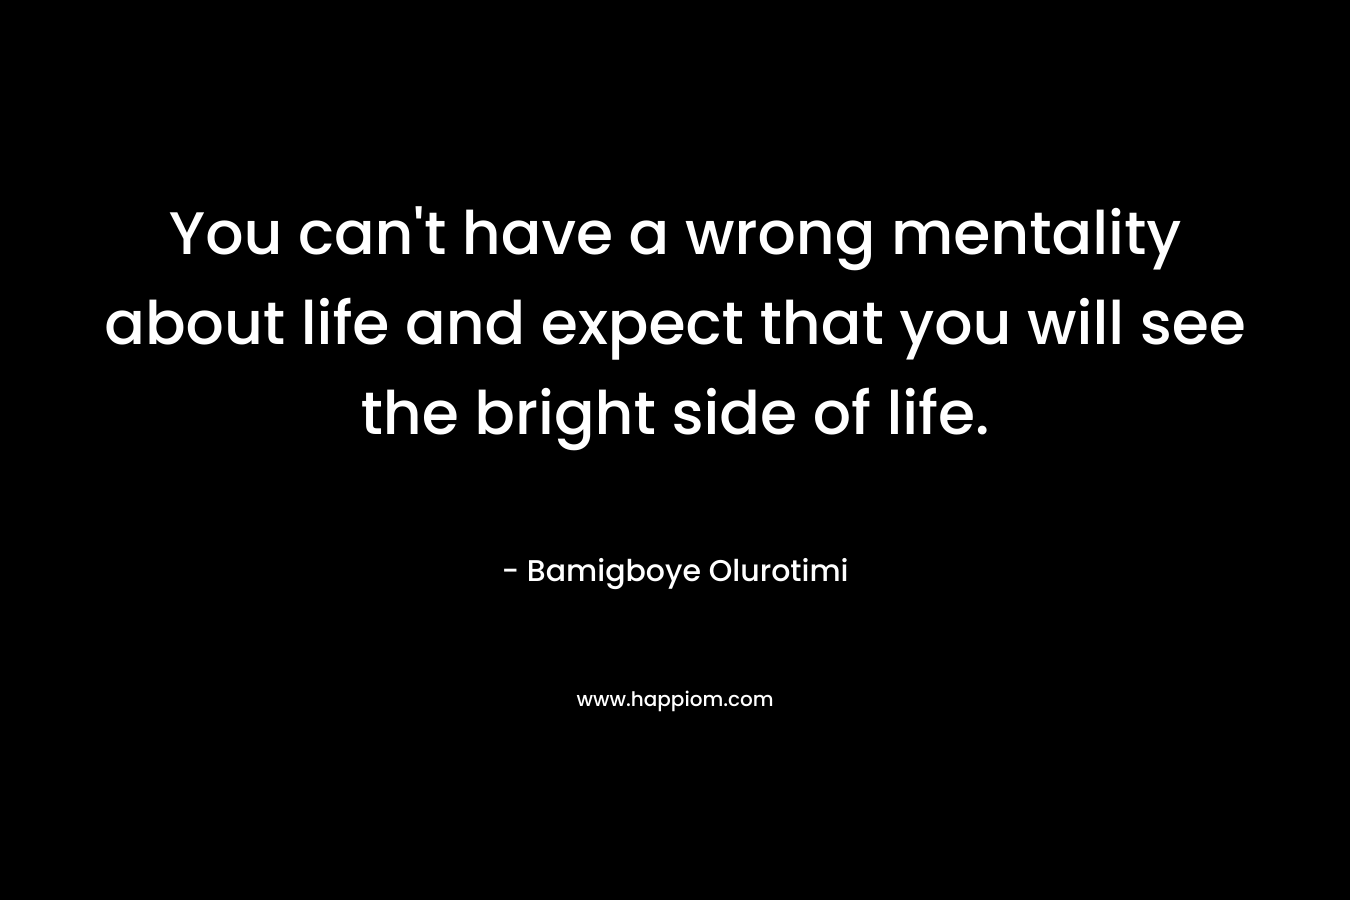 You can't have a wrong mentality about life and expect that you will see the bright side of life.